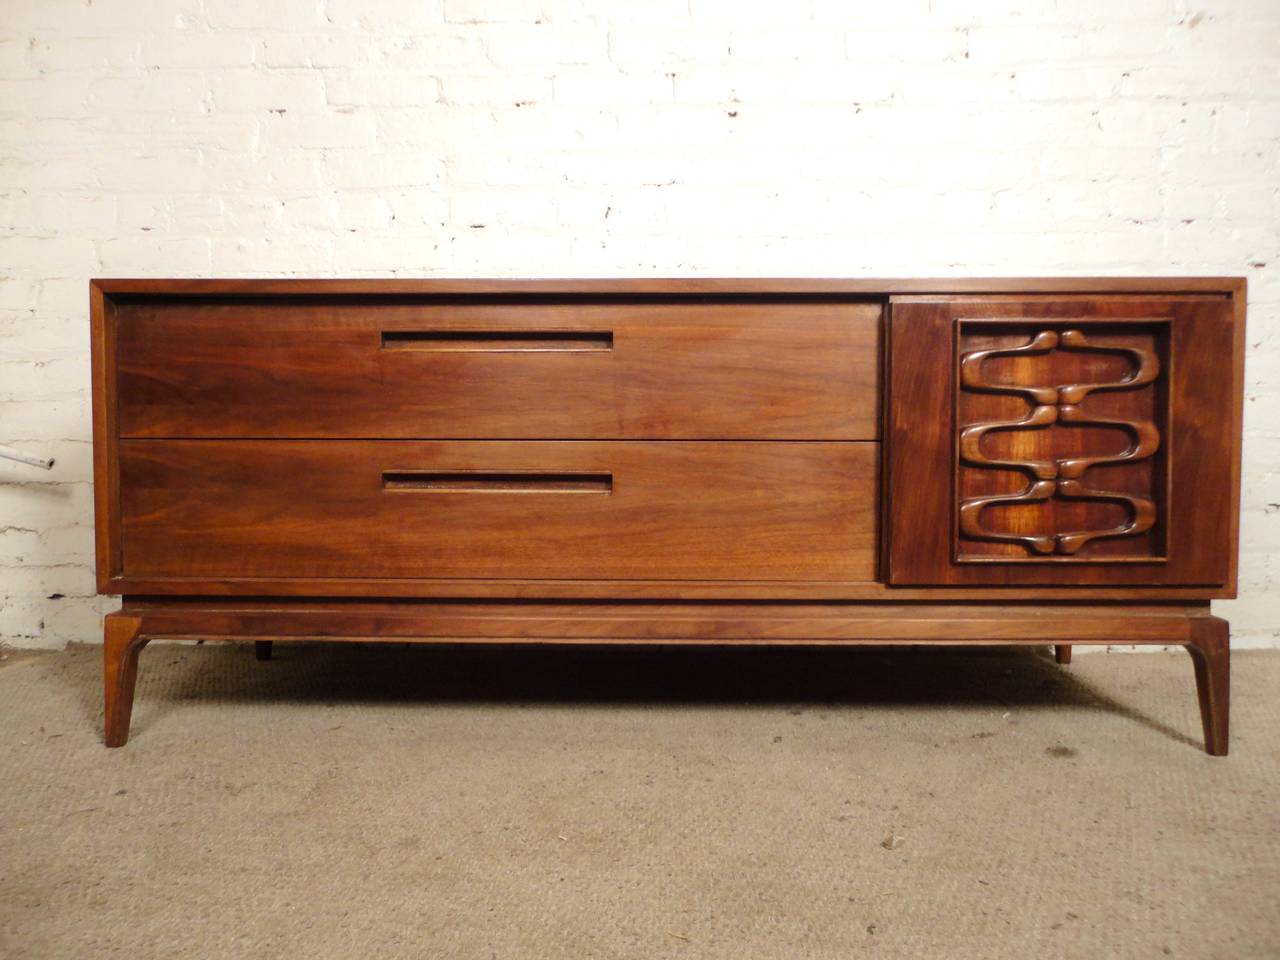 Mid-Century Modern low dresser with sculpted sliding door. Full walnut grain throughout, wide dresser drawers and two smaller drawers hidden by the Witco style gliding door. Makes a great console, credenza or dresser.

(Please confirm item